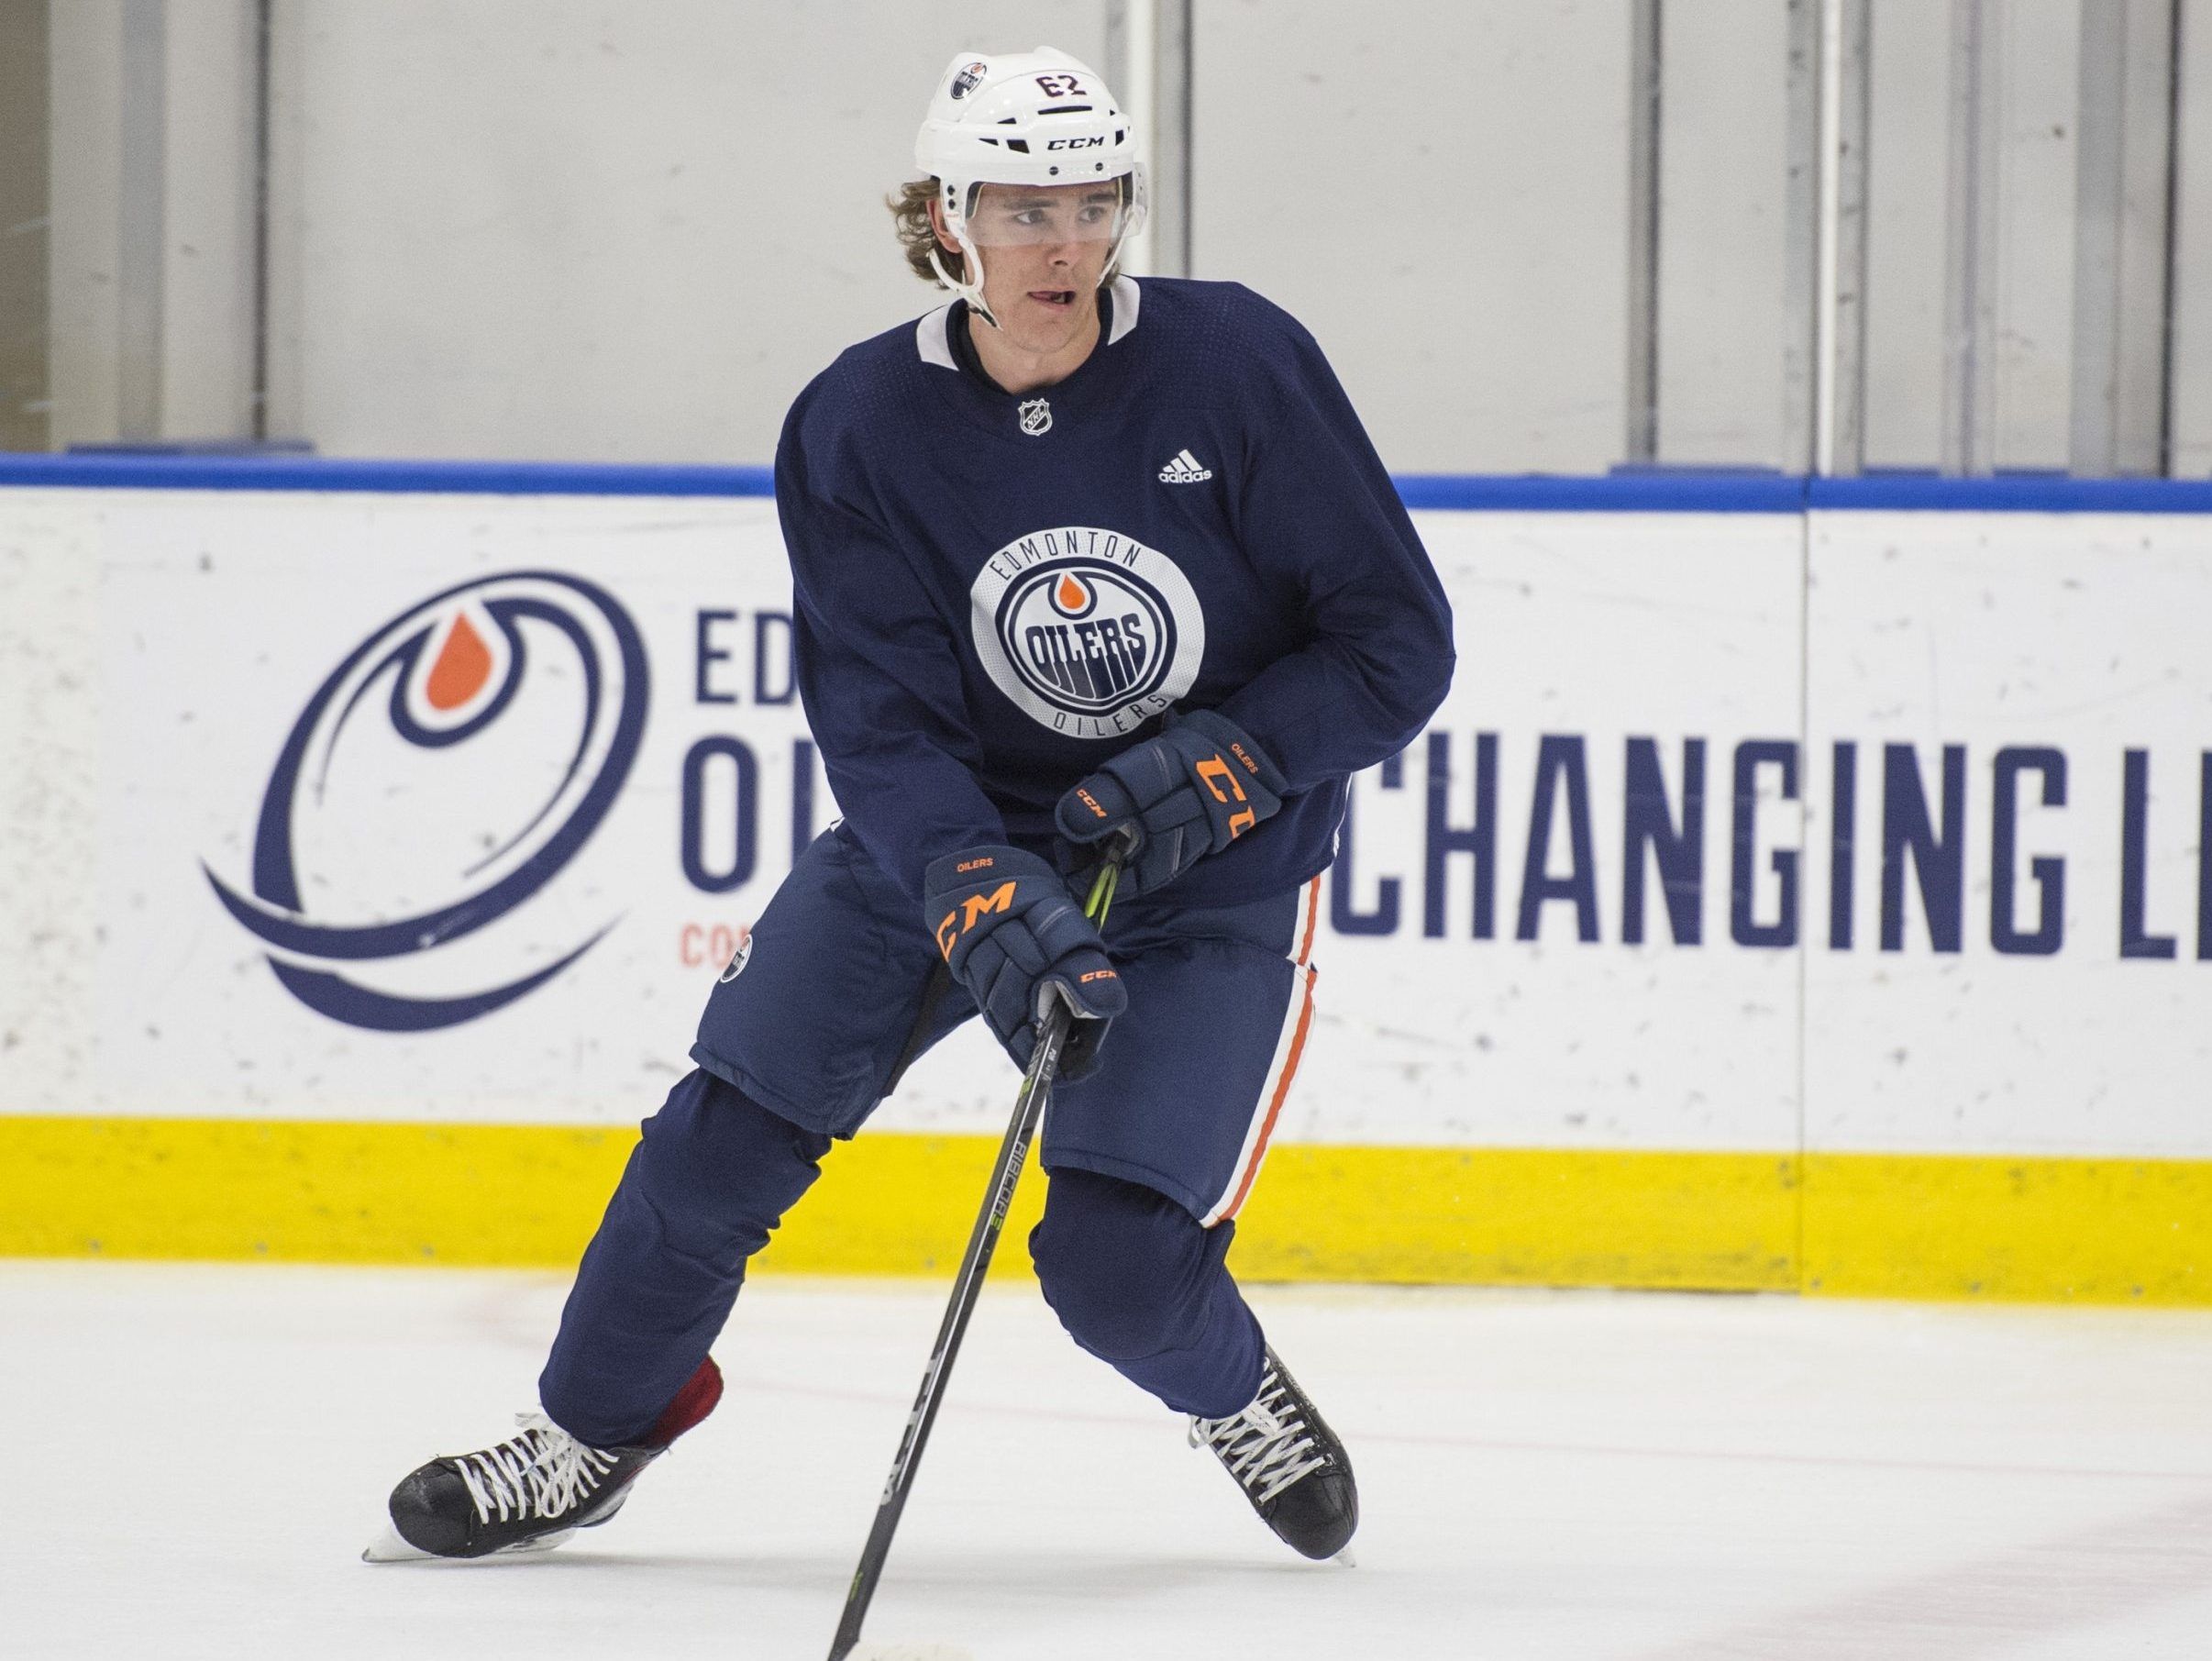 Should he stay or should he go? Lavoie poses risky dilemma for Oilers Edmonton Sun